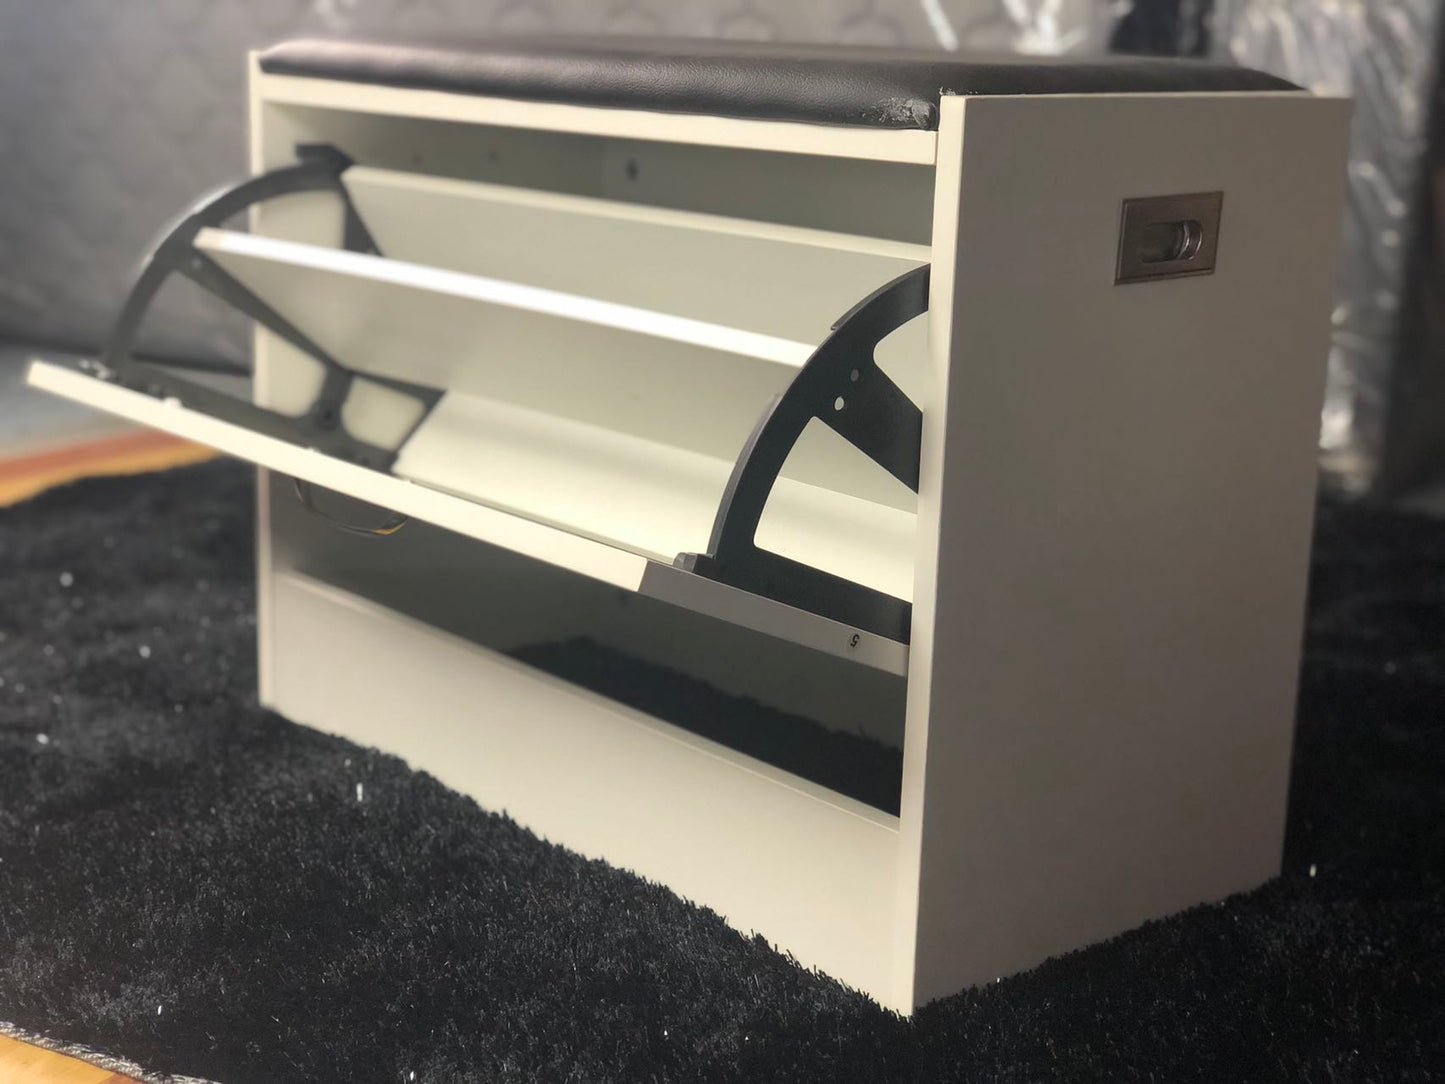 Shoe Cabinet with 1 Flip Drawer